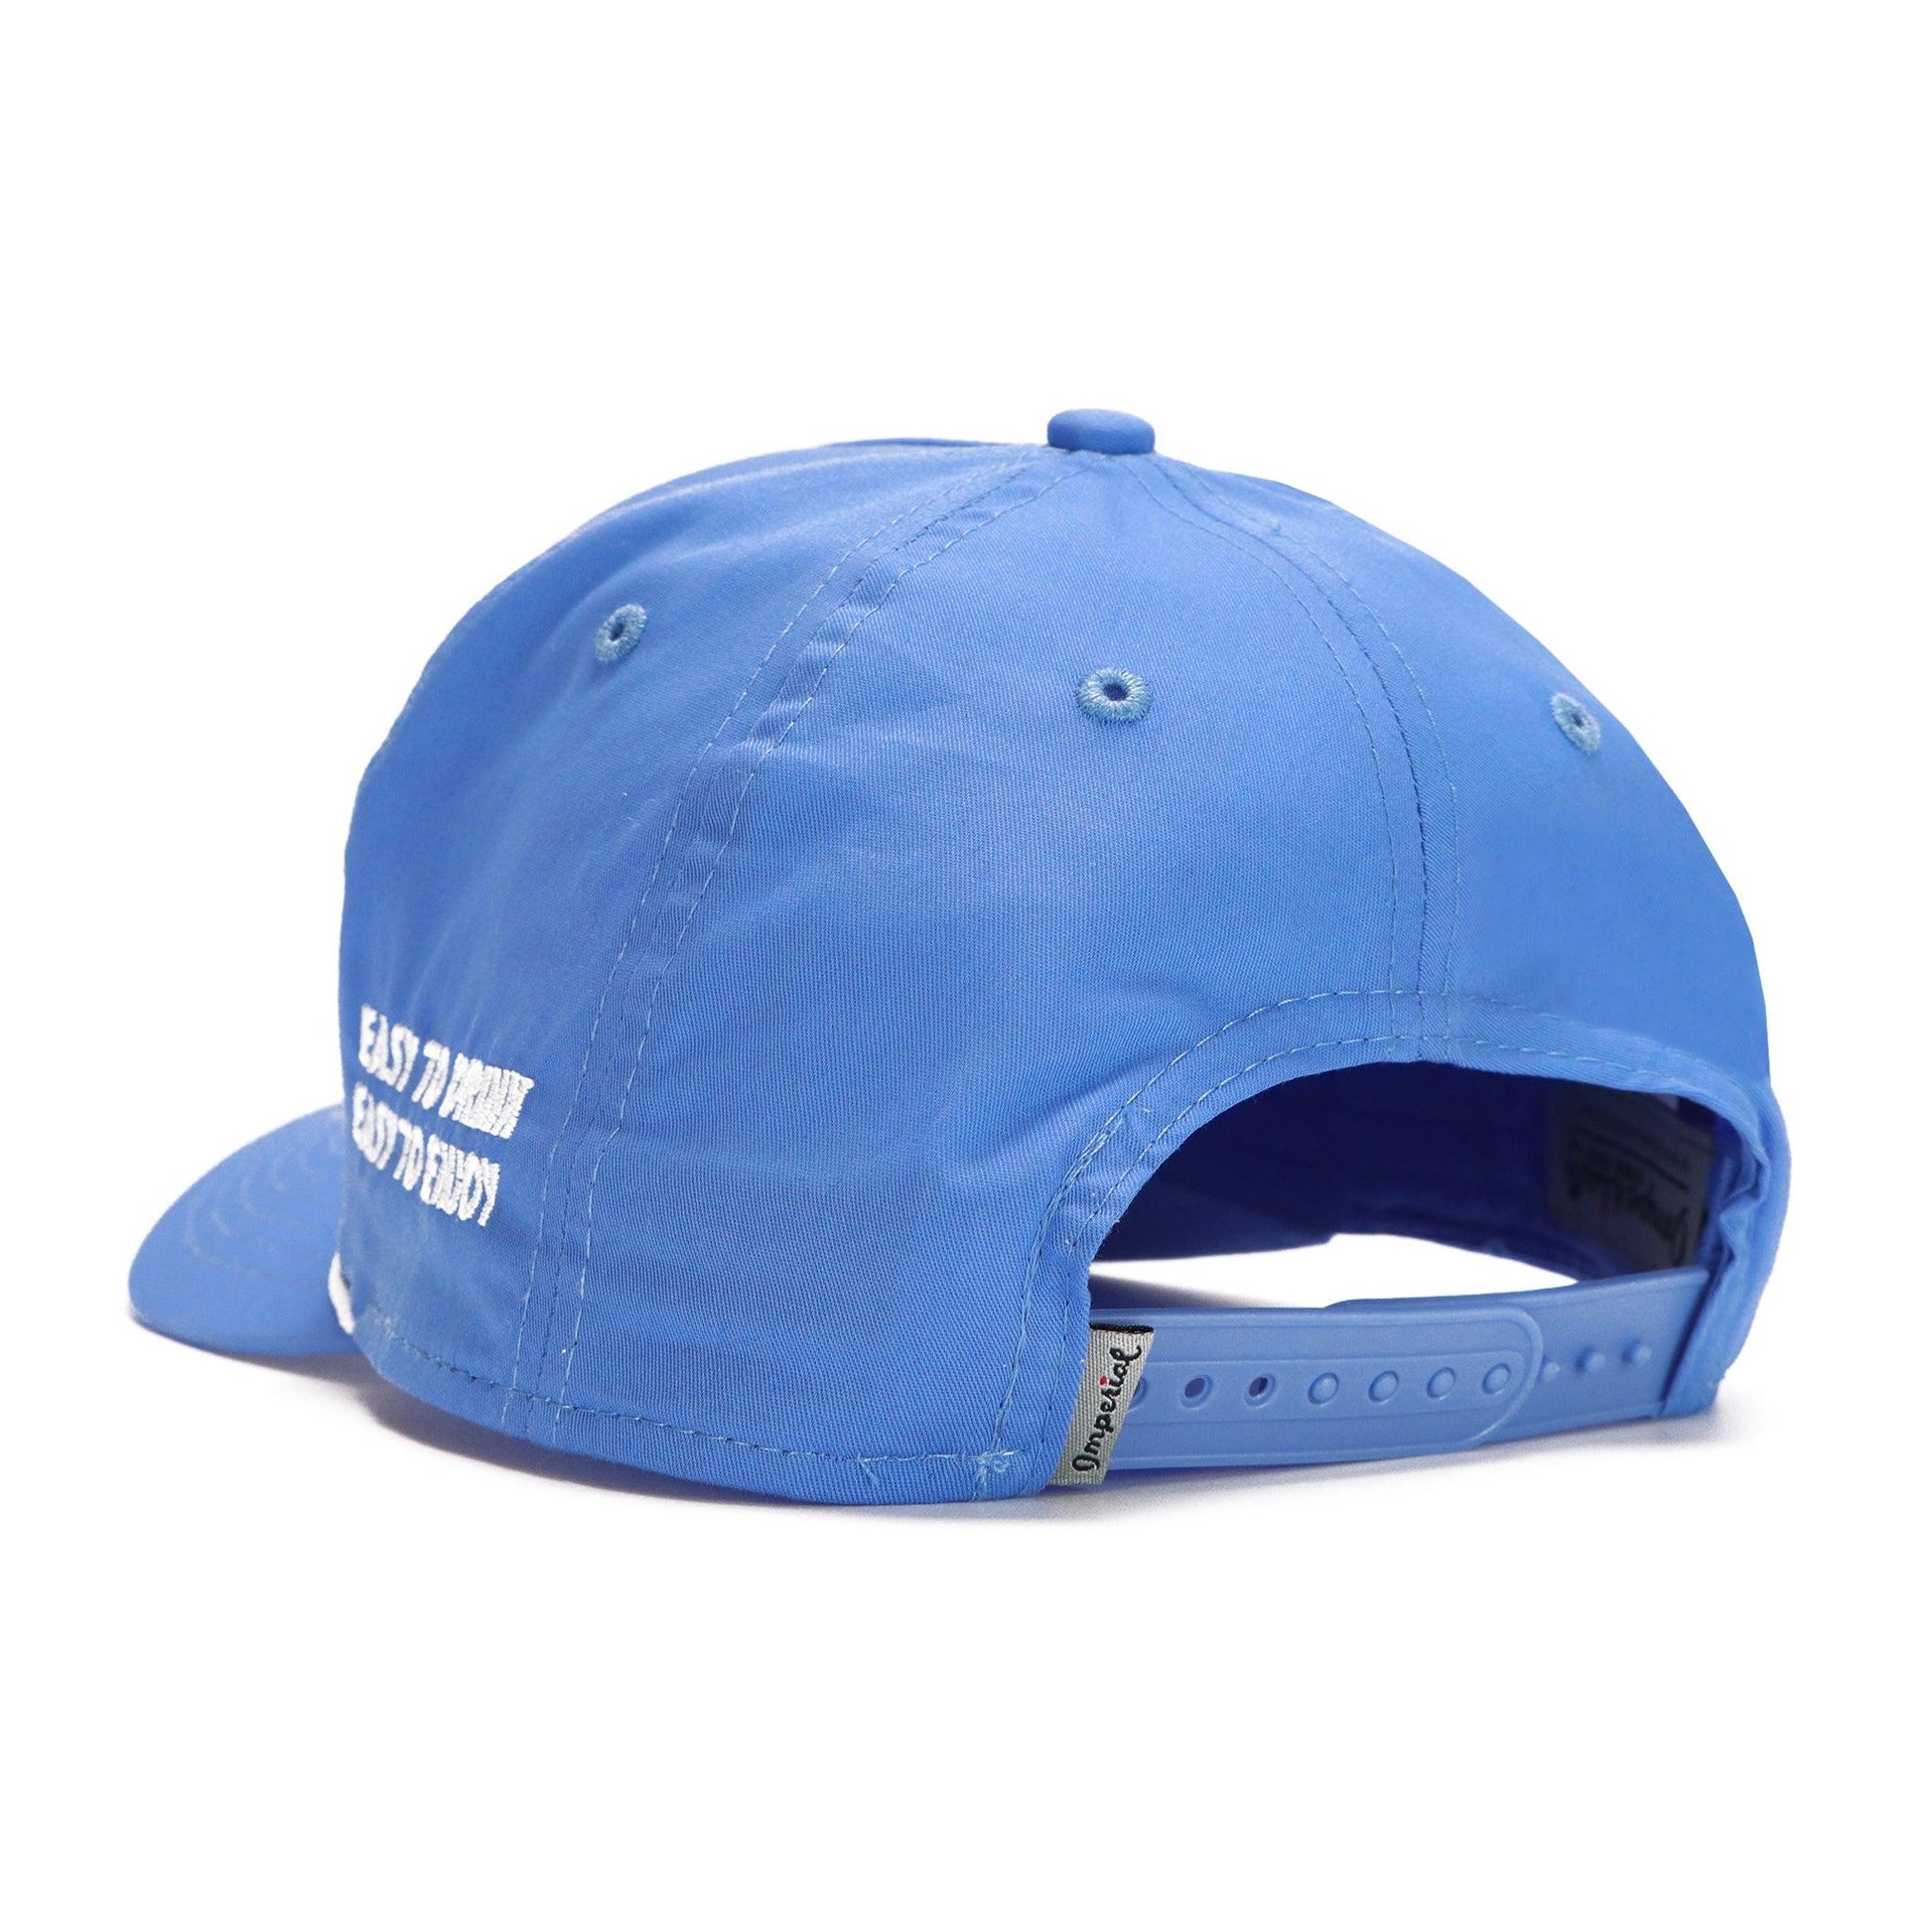 back view of hat with snapback 